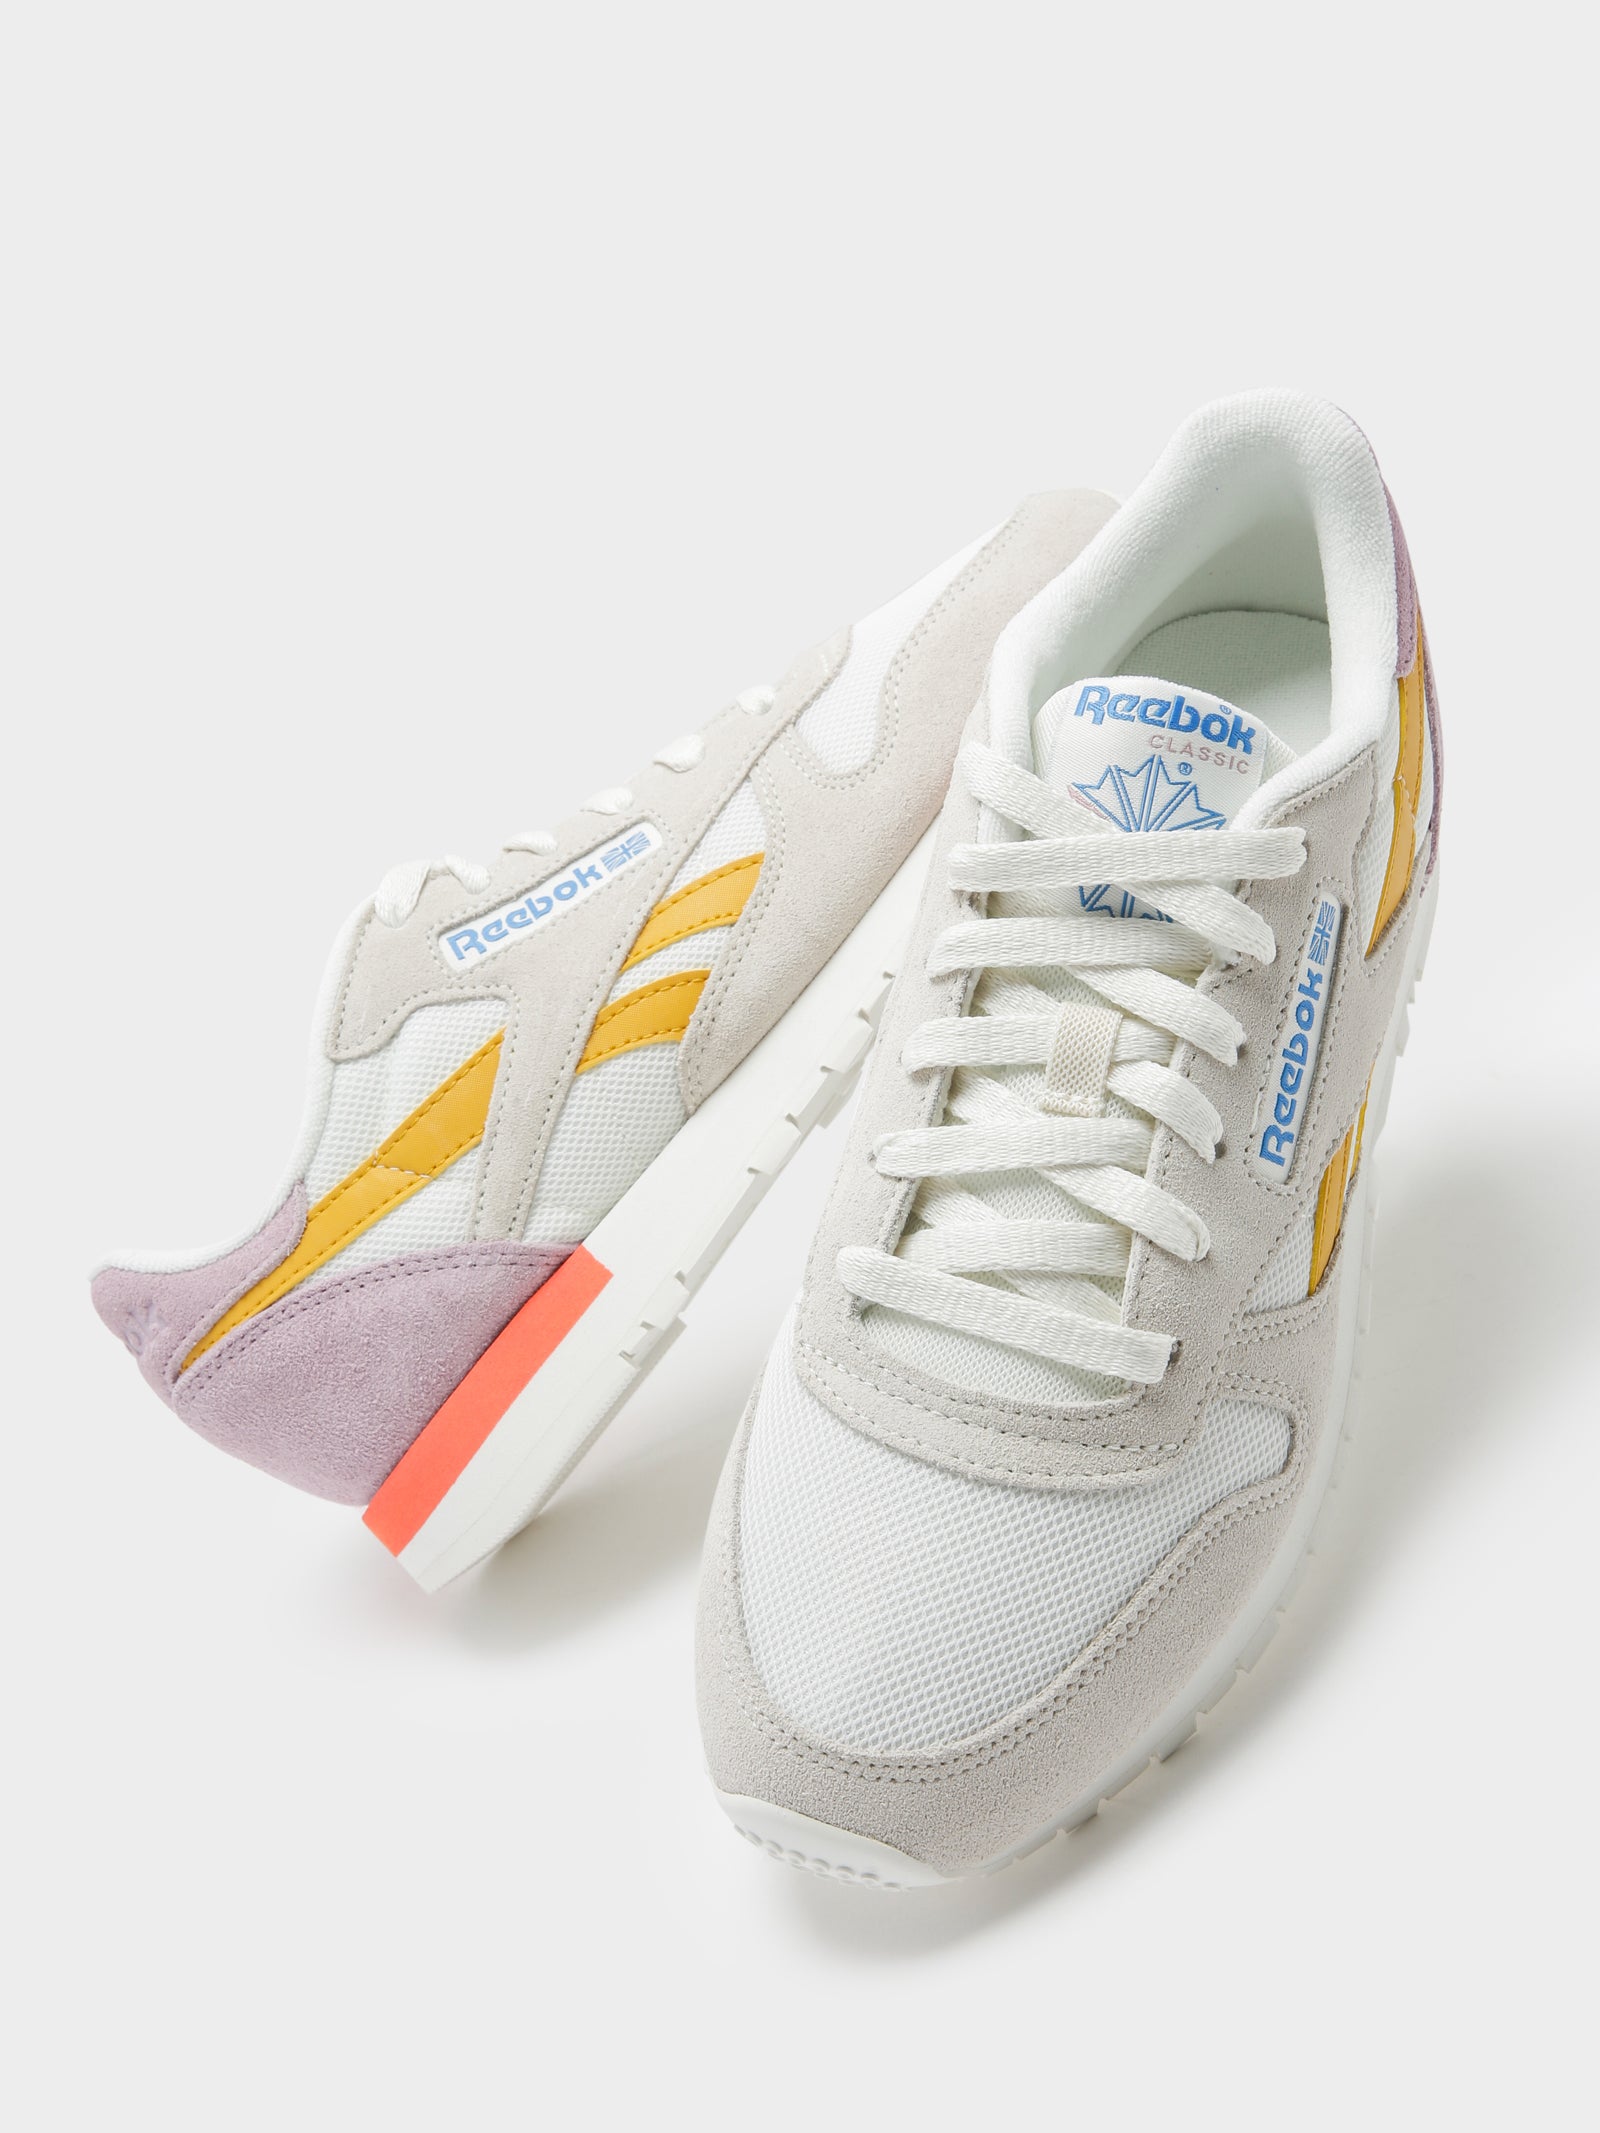 Womens Classic Leather Sneakers in Chalk, Ochre & Lilac